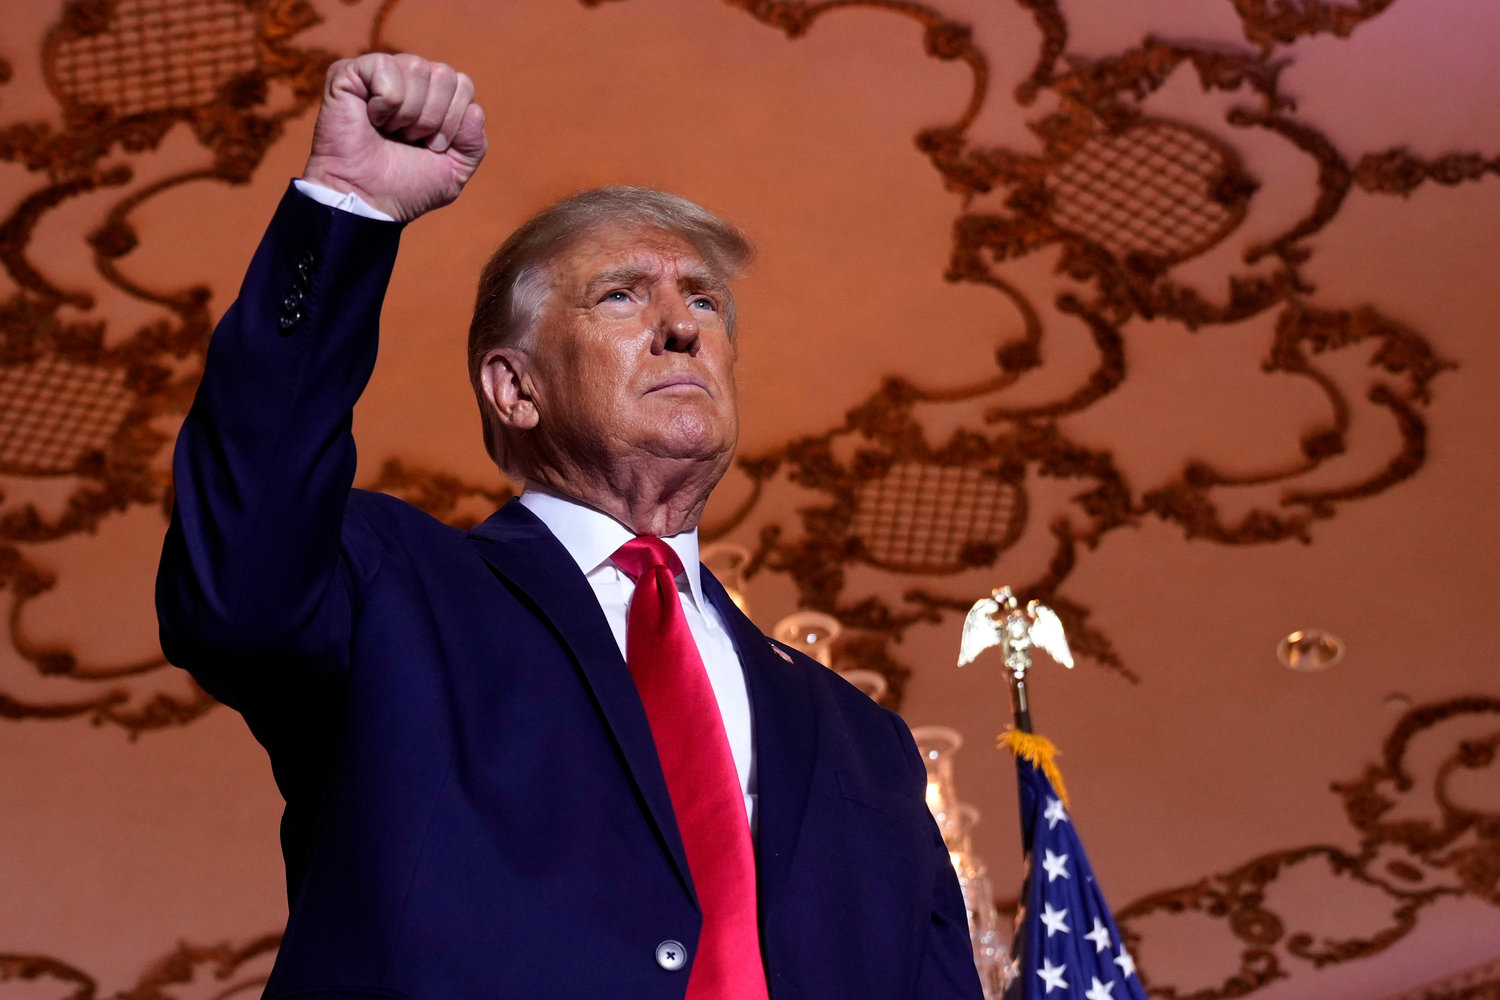 Former President Donald Trump stands on stage after announcing a third run for president at Mar-a-Lago in Palm Beach, Fla., Nov. 15. Trump has spent years teasing the prospect of another presidential run. But in the first week since announcing his third bid for the White House, he’s done little to suggest that he’s organizing a traditional campaign.